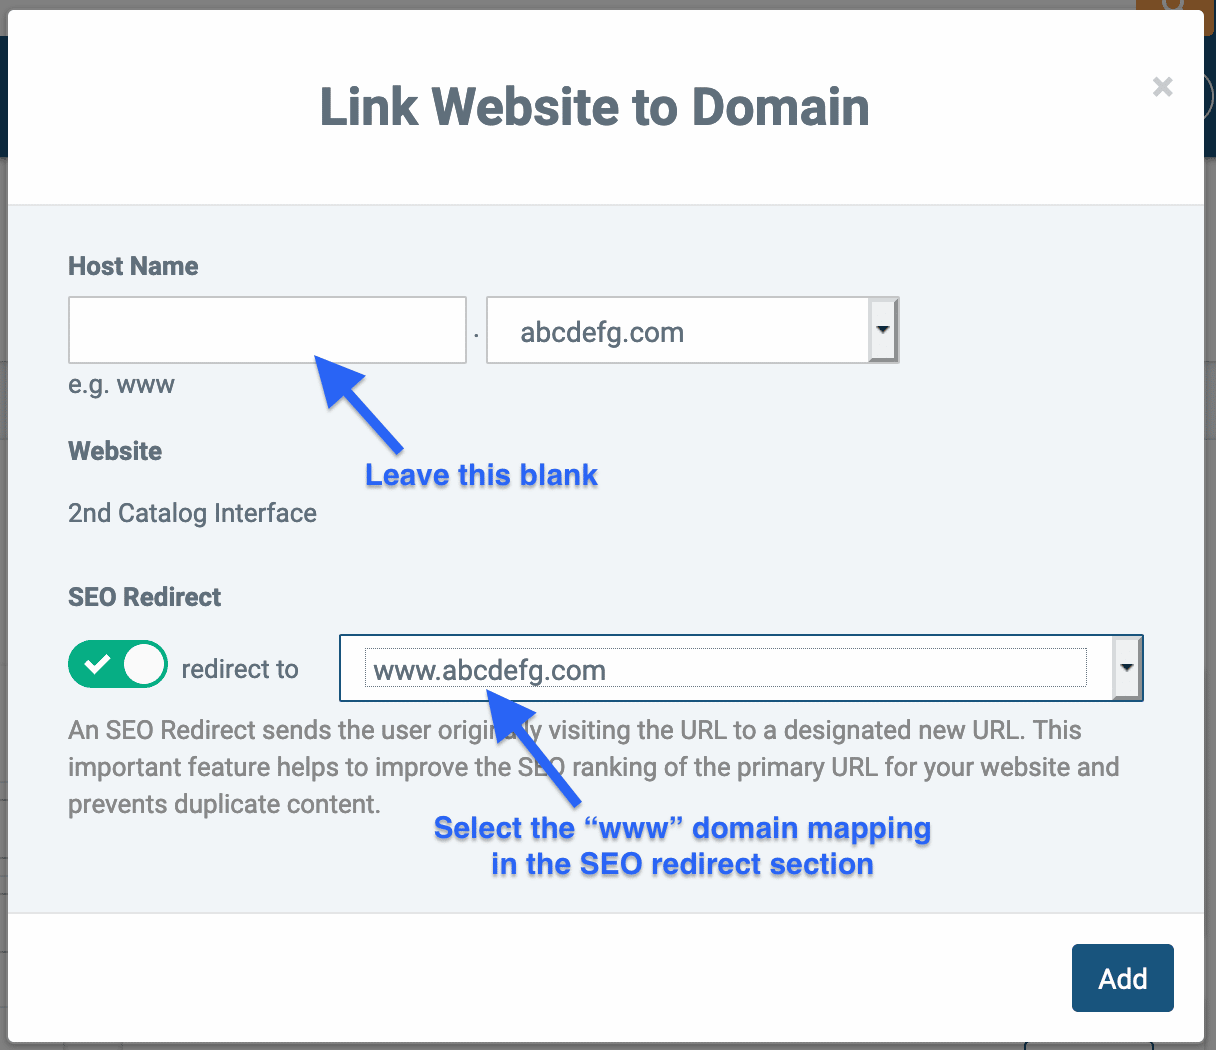 How to Link a Domain to a Website